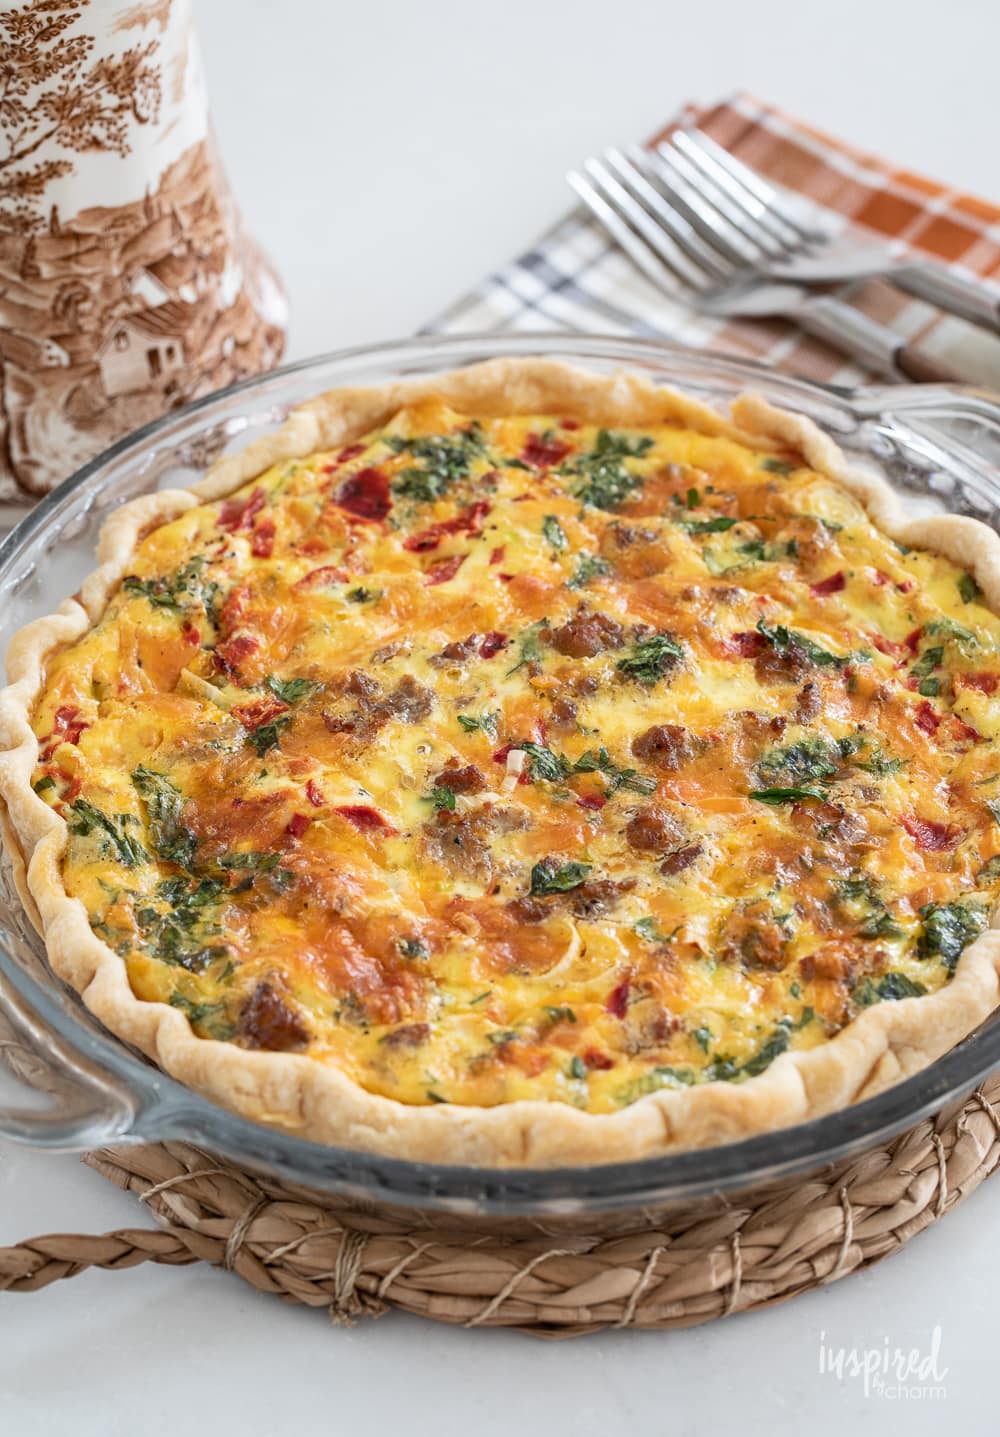 Roasted Red Pepper and Sausage Quiche